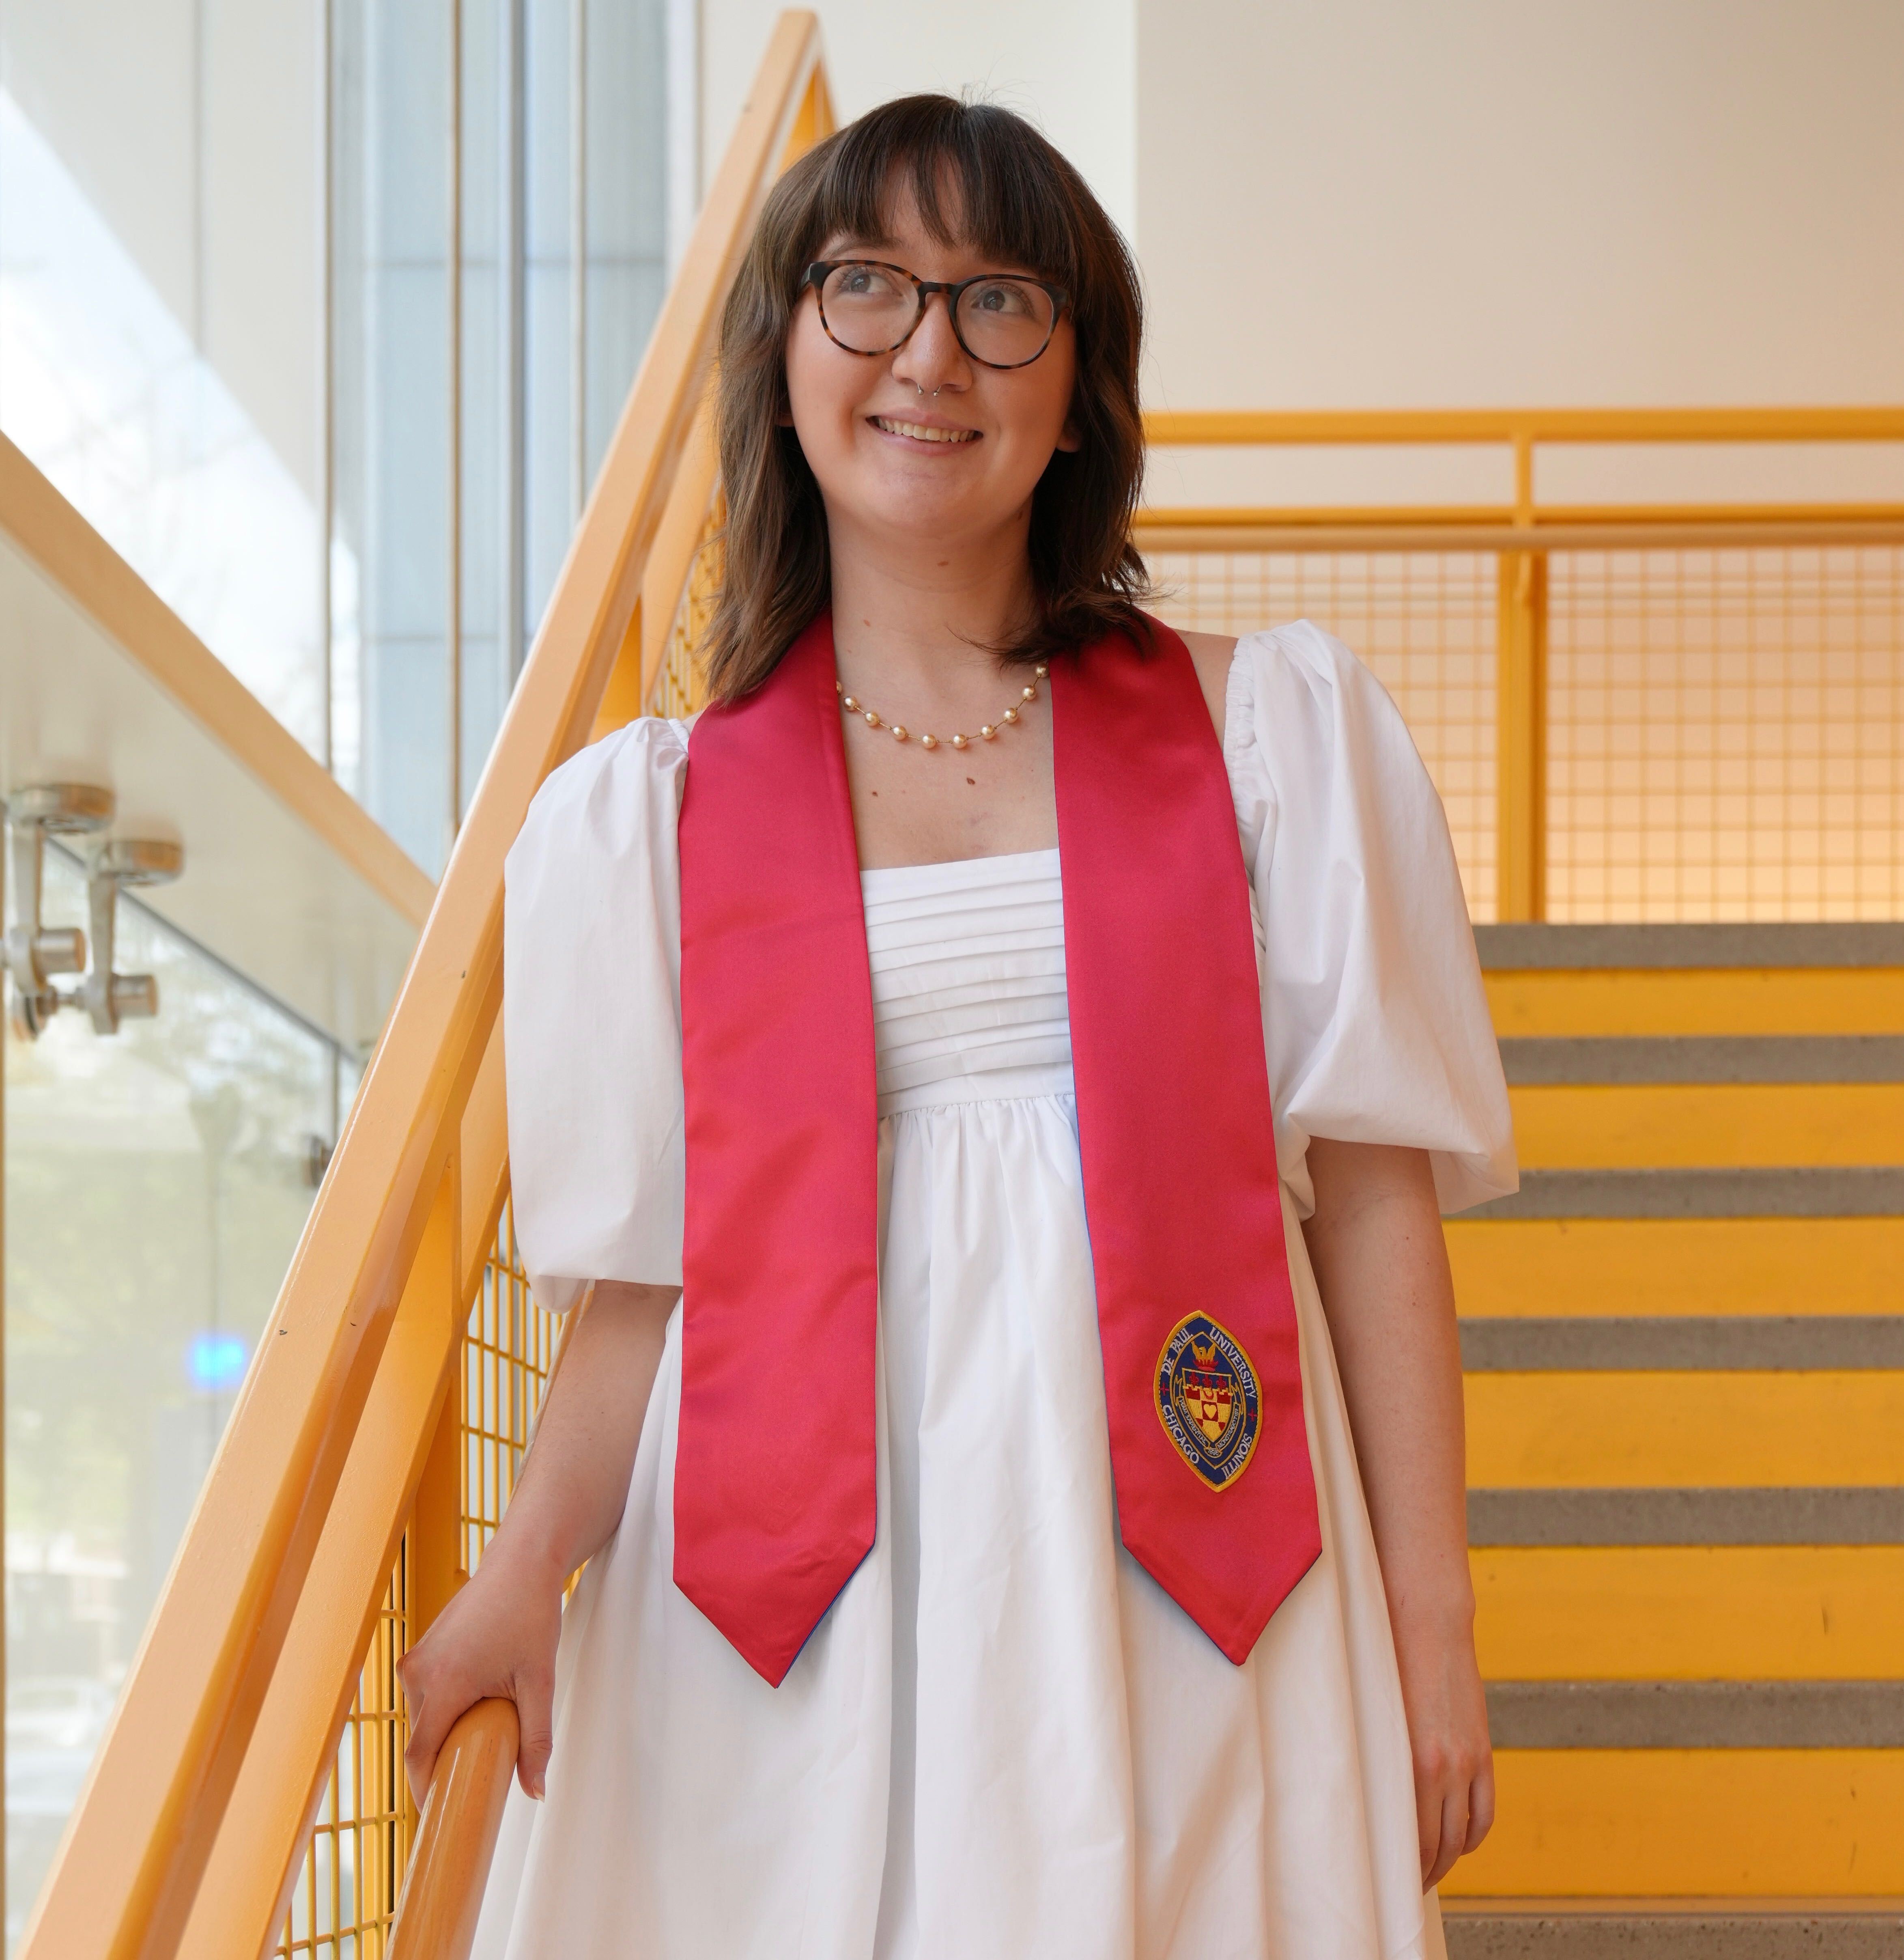 Grace Archer stands on the yellow stairs and wears a white dress with a red graduation sash